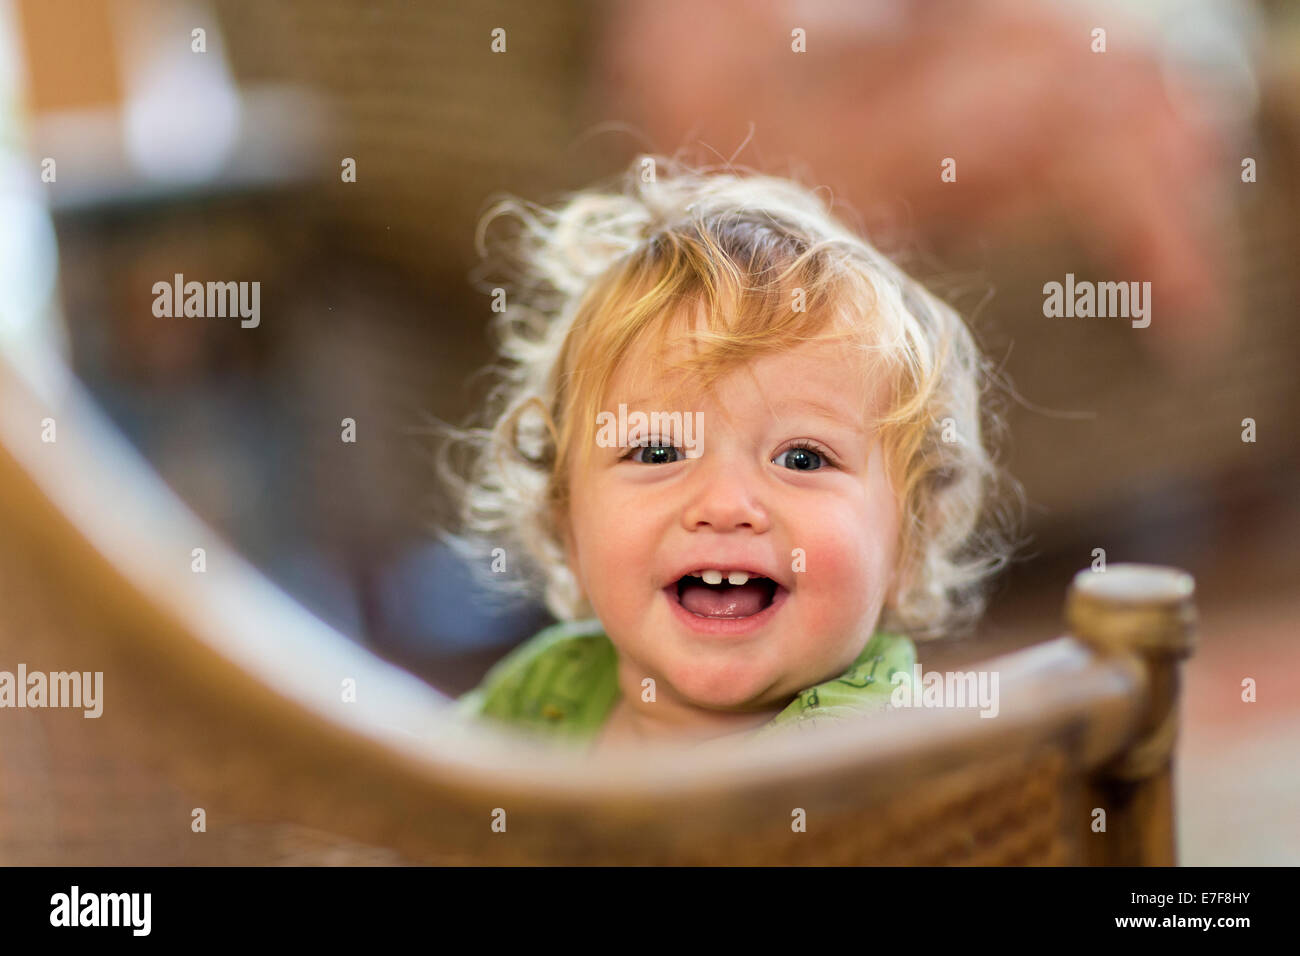 Caucasian toddler standing on chair Stock Photo